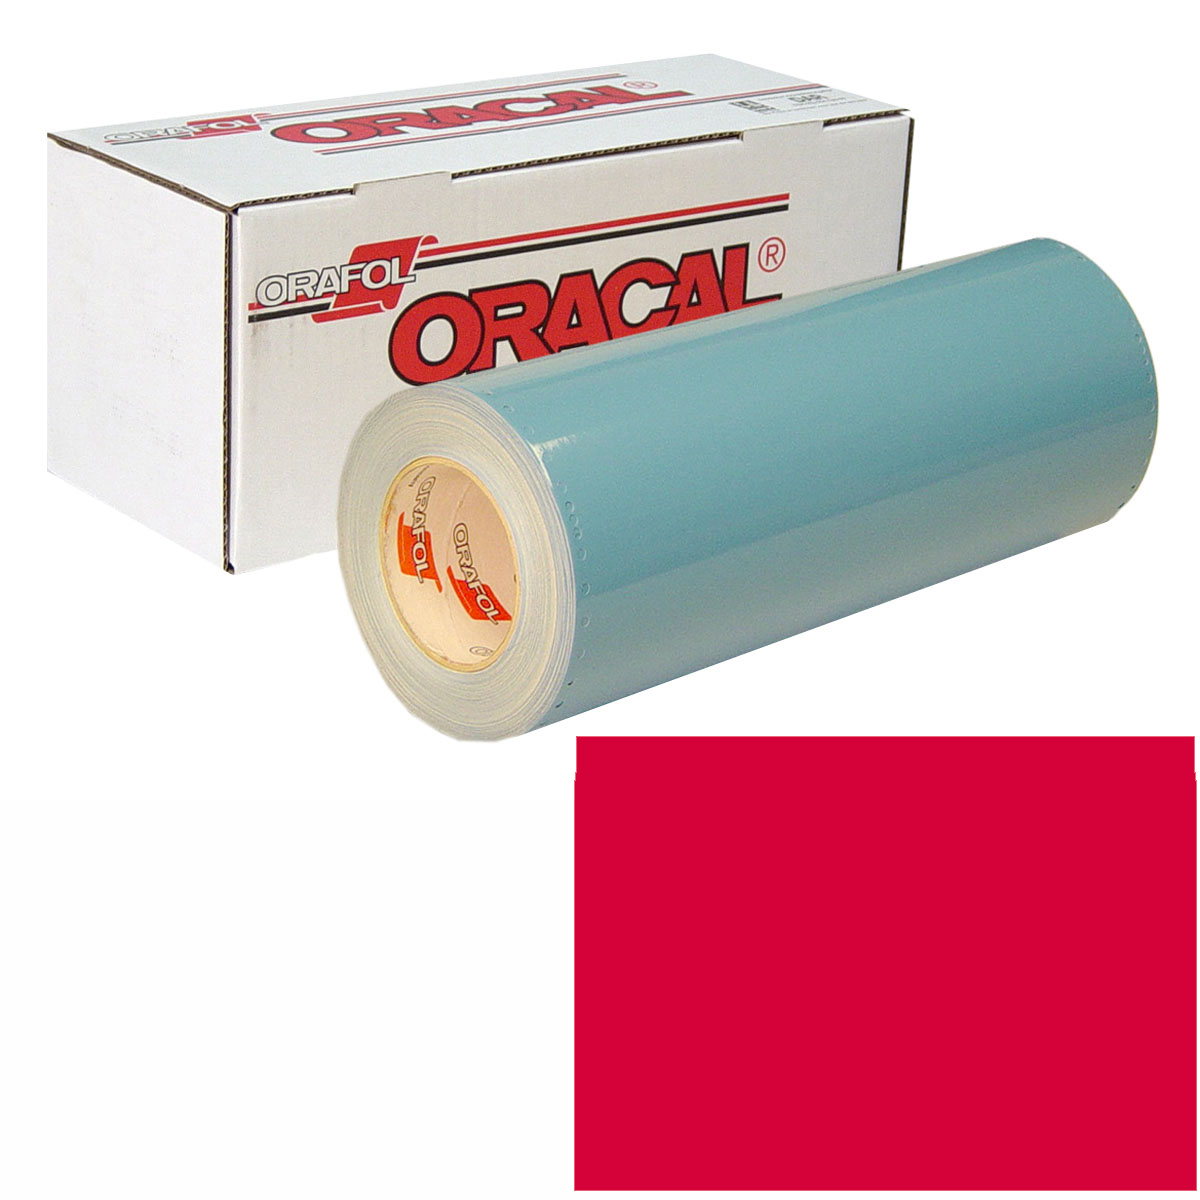 ORACAL 751 15in X 50yd 032 Light Red